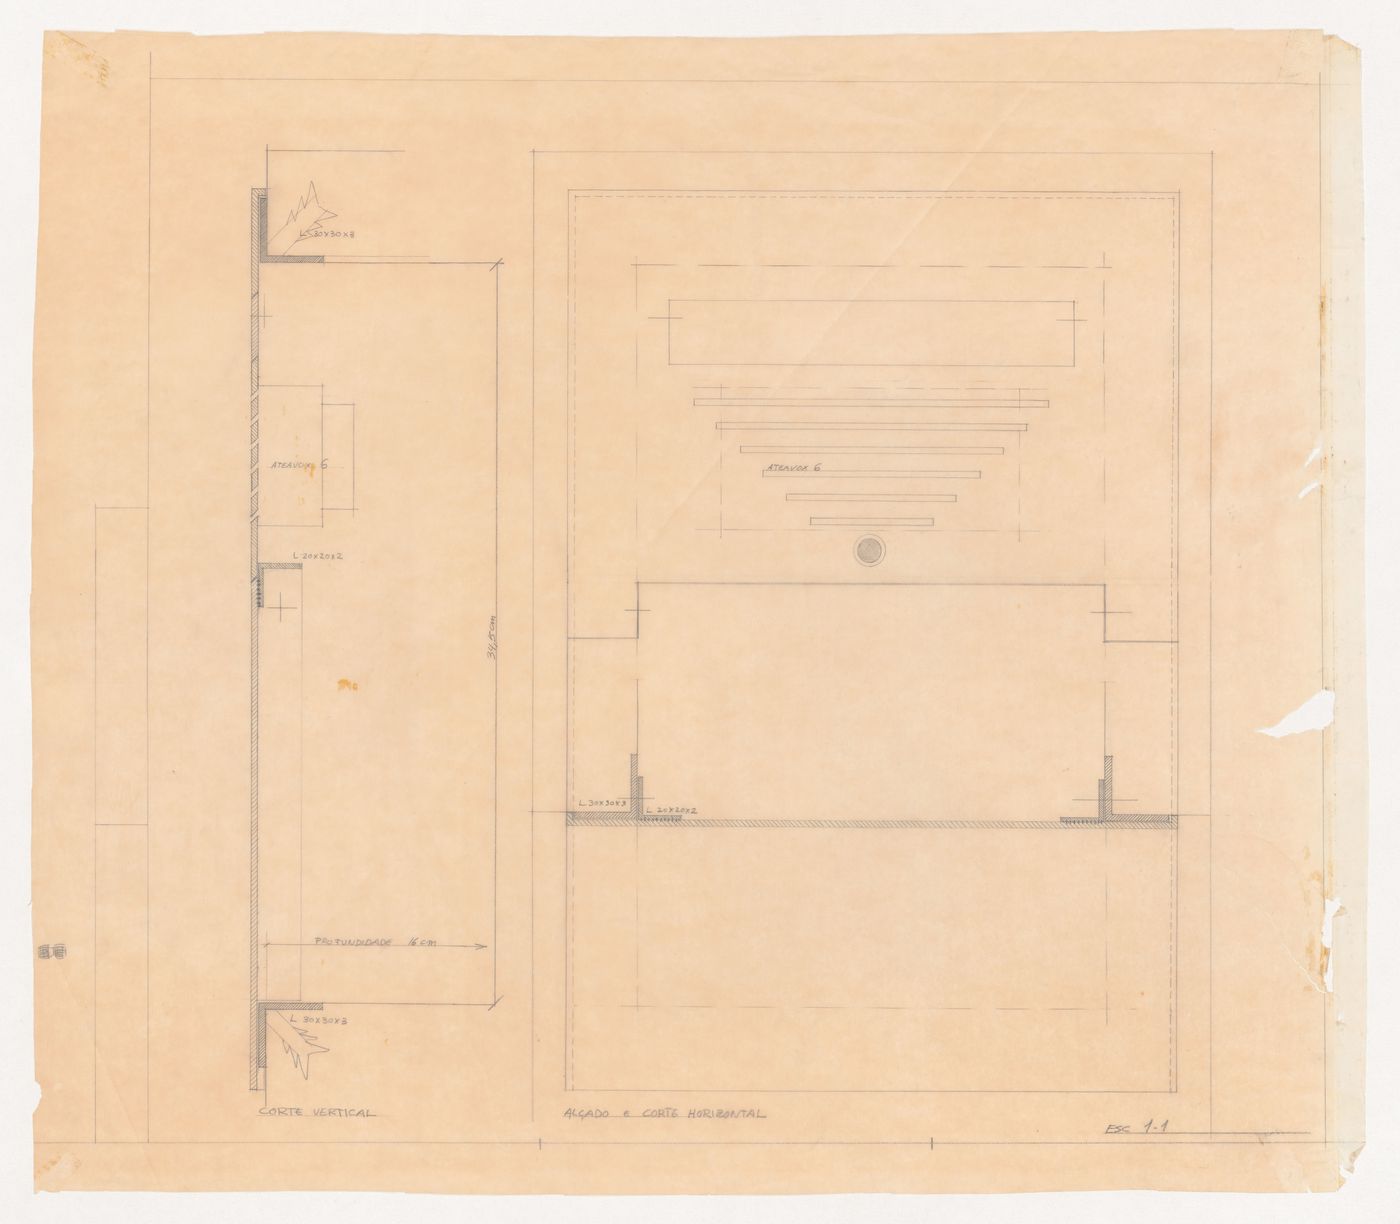 Sections and elevation for intercom for Casa Manuel Magalhães, Porto